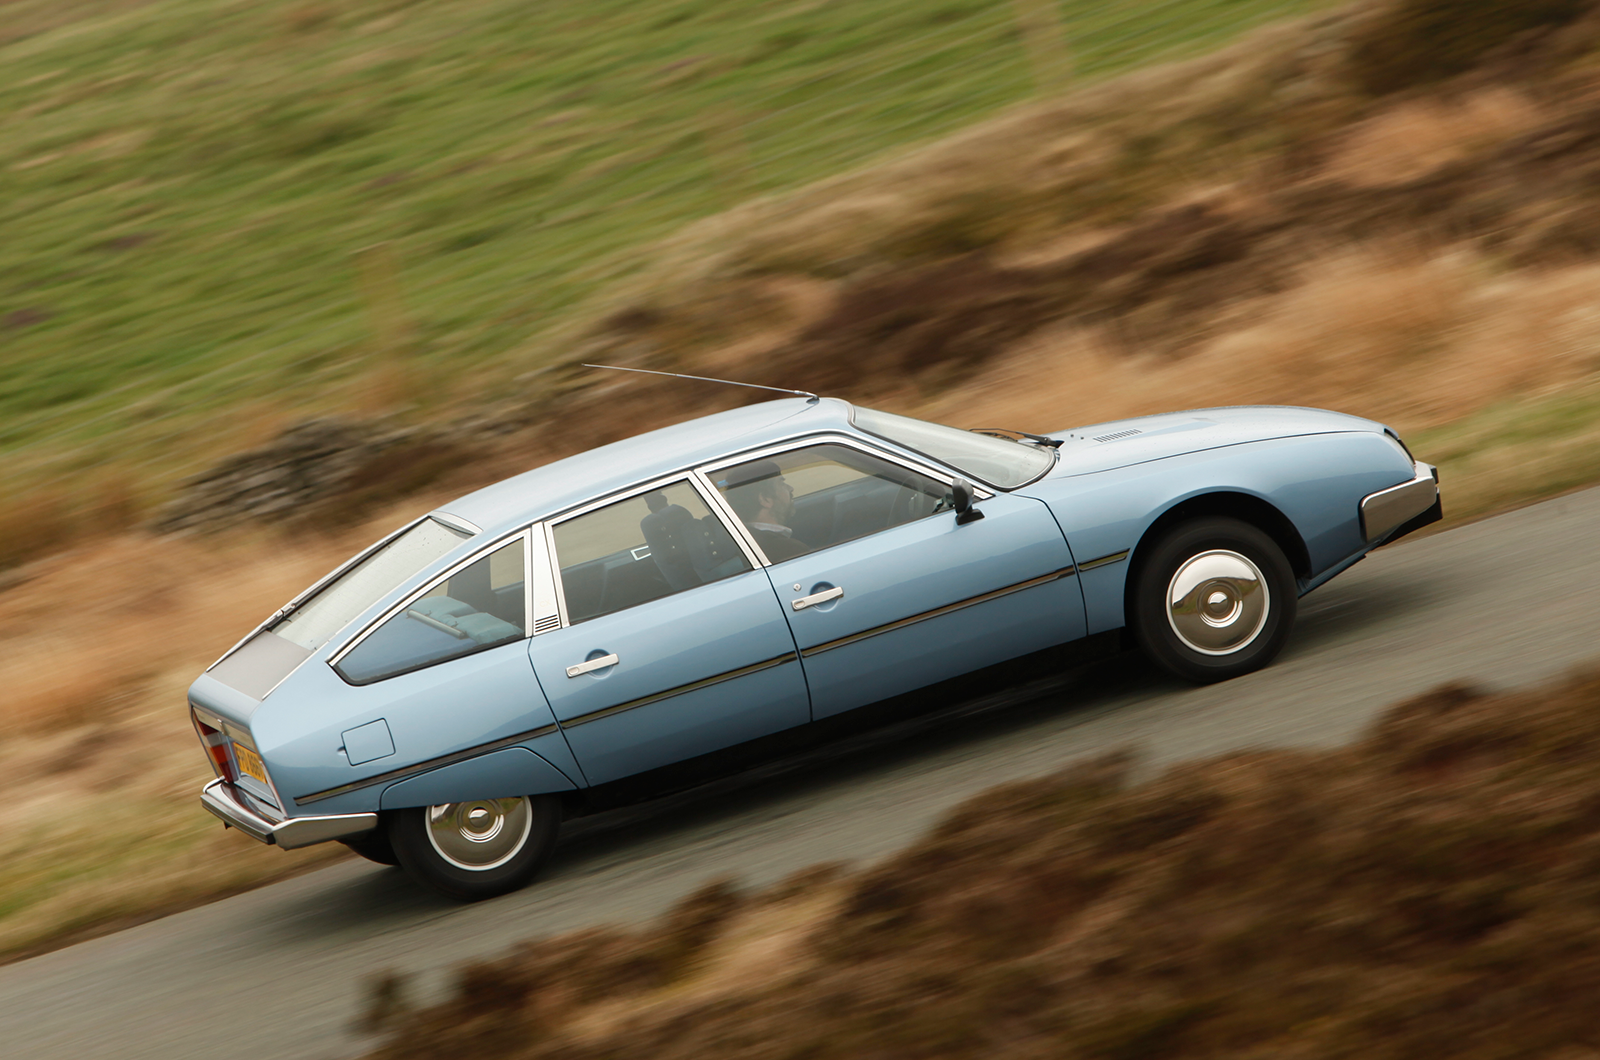 Classic & Sports Car – Celebrating the big Citroën saloon with DS, CX, XM and C6